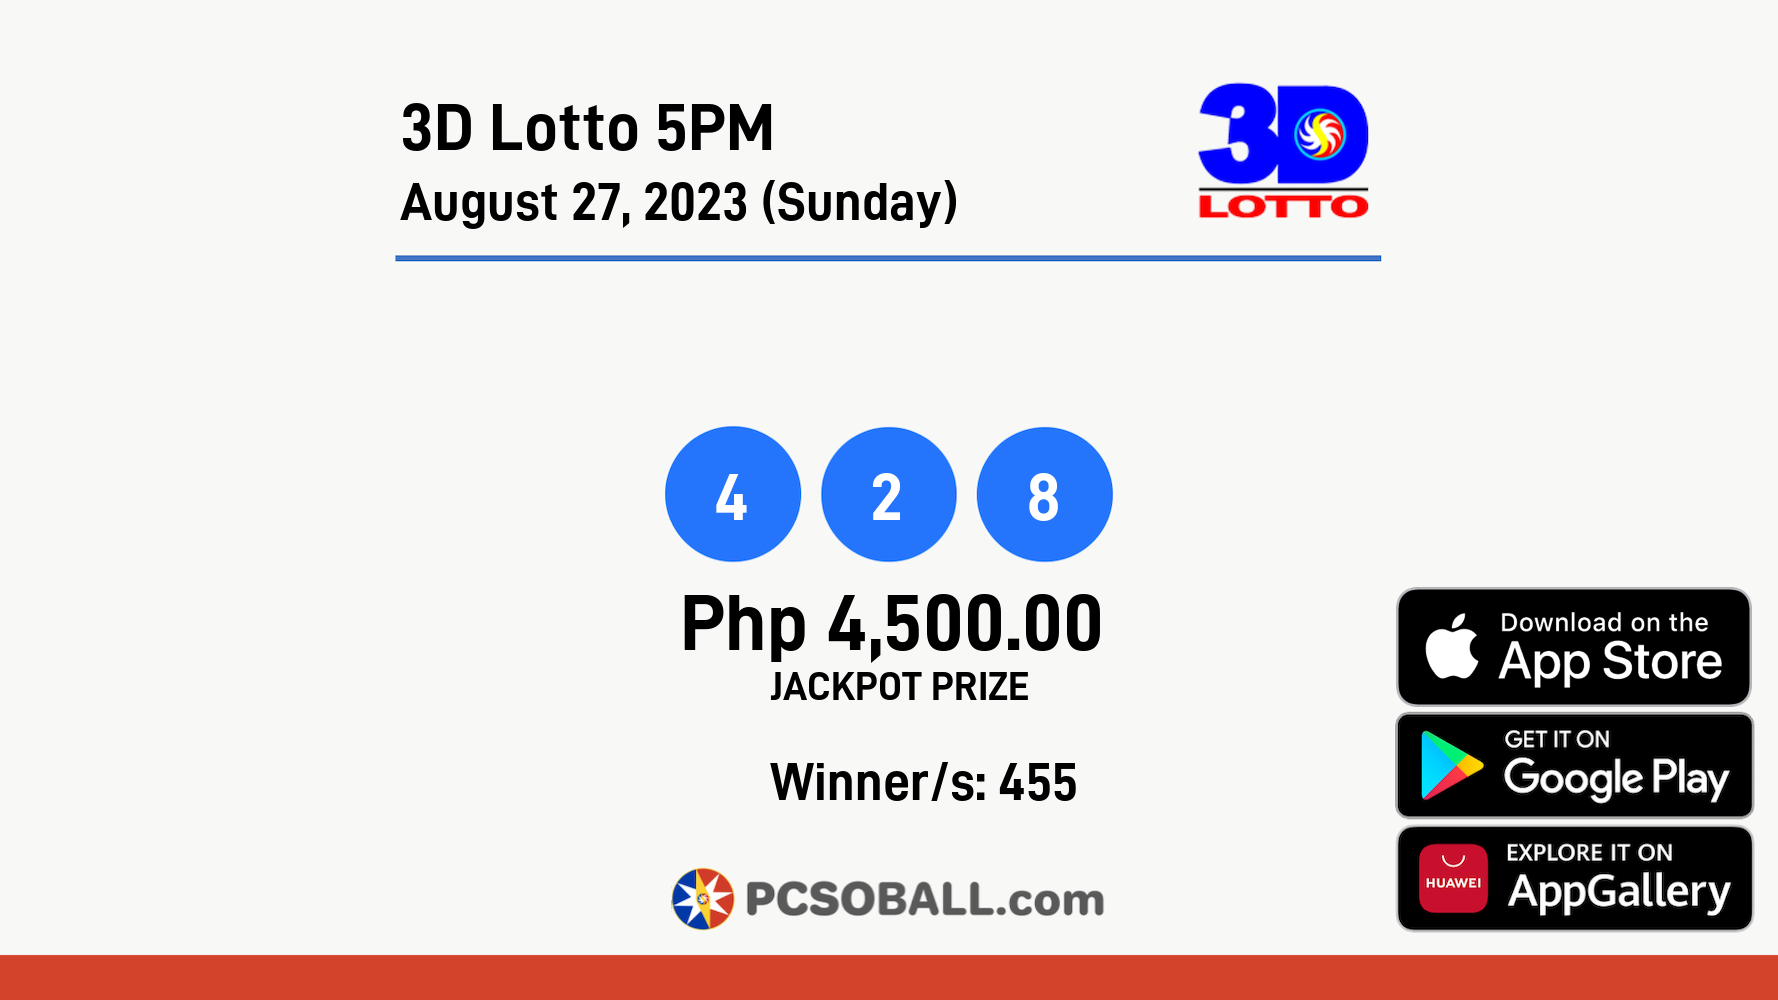 3D Lotto 5PM August 27, 2023 (Sunday) Result